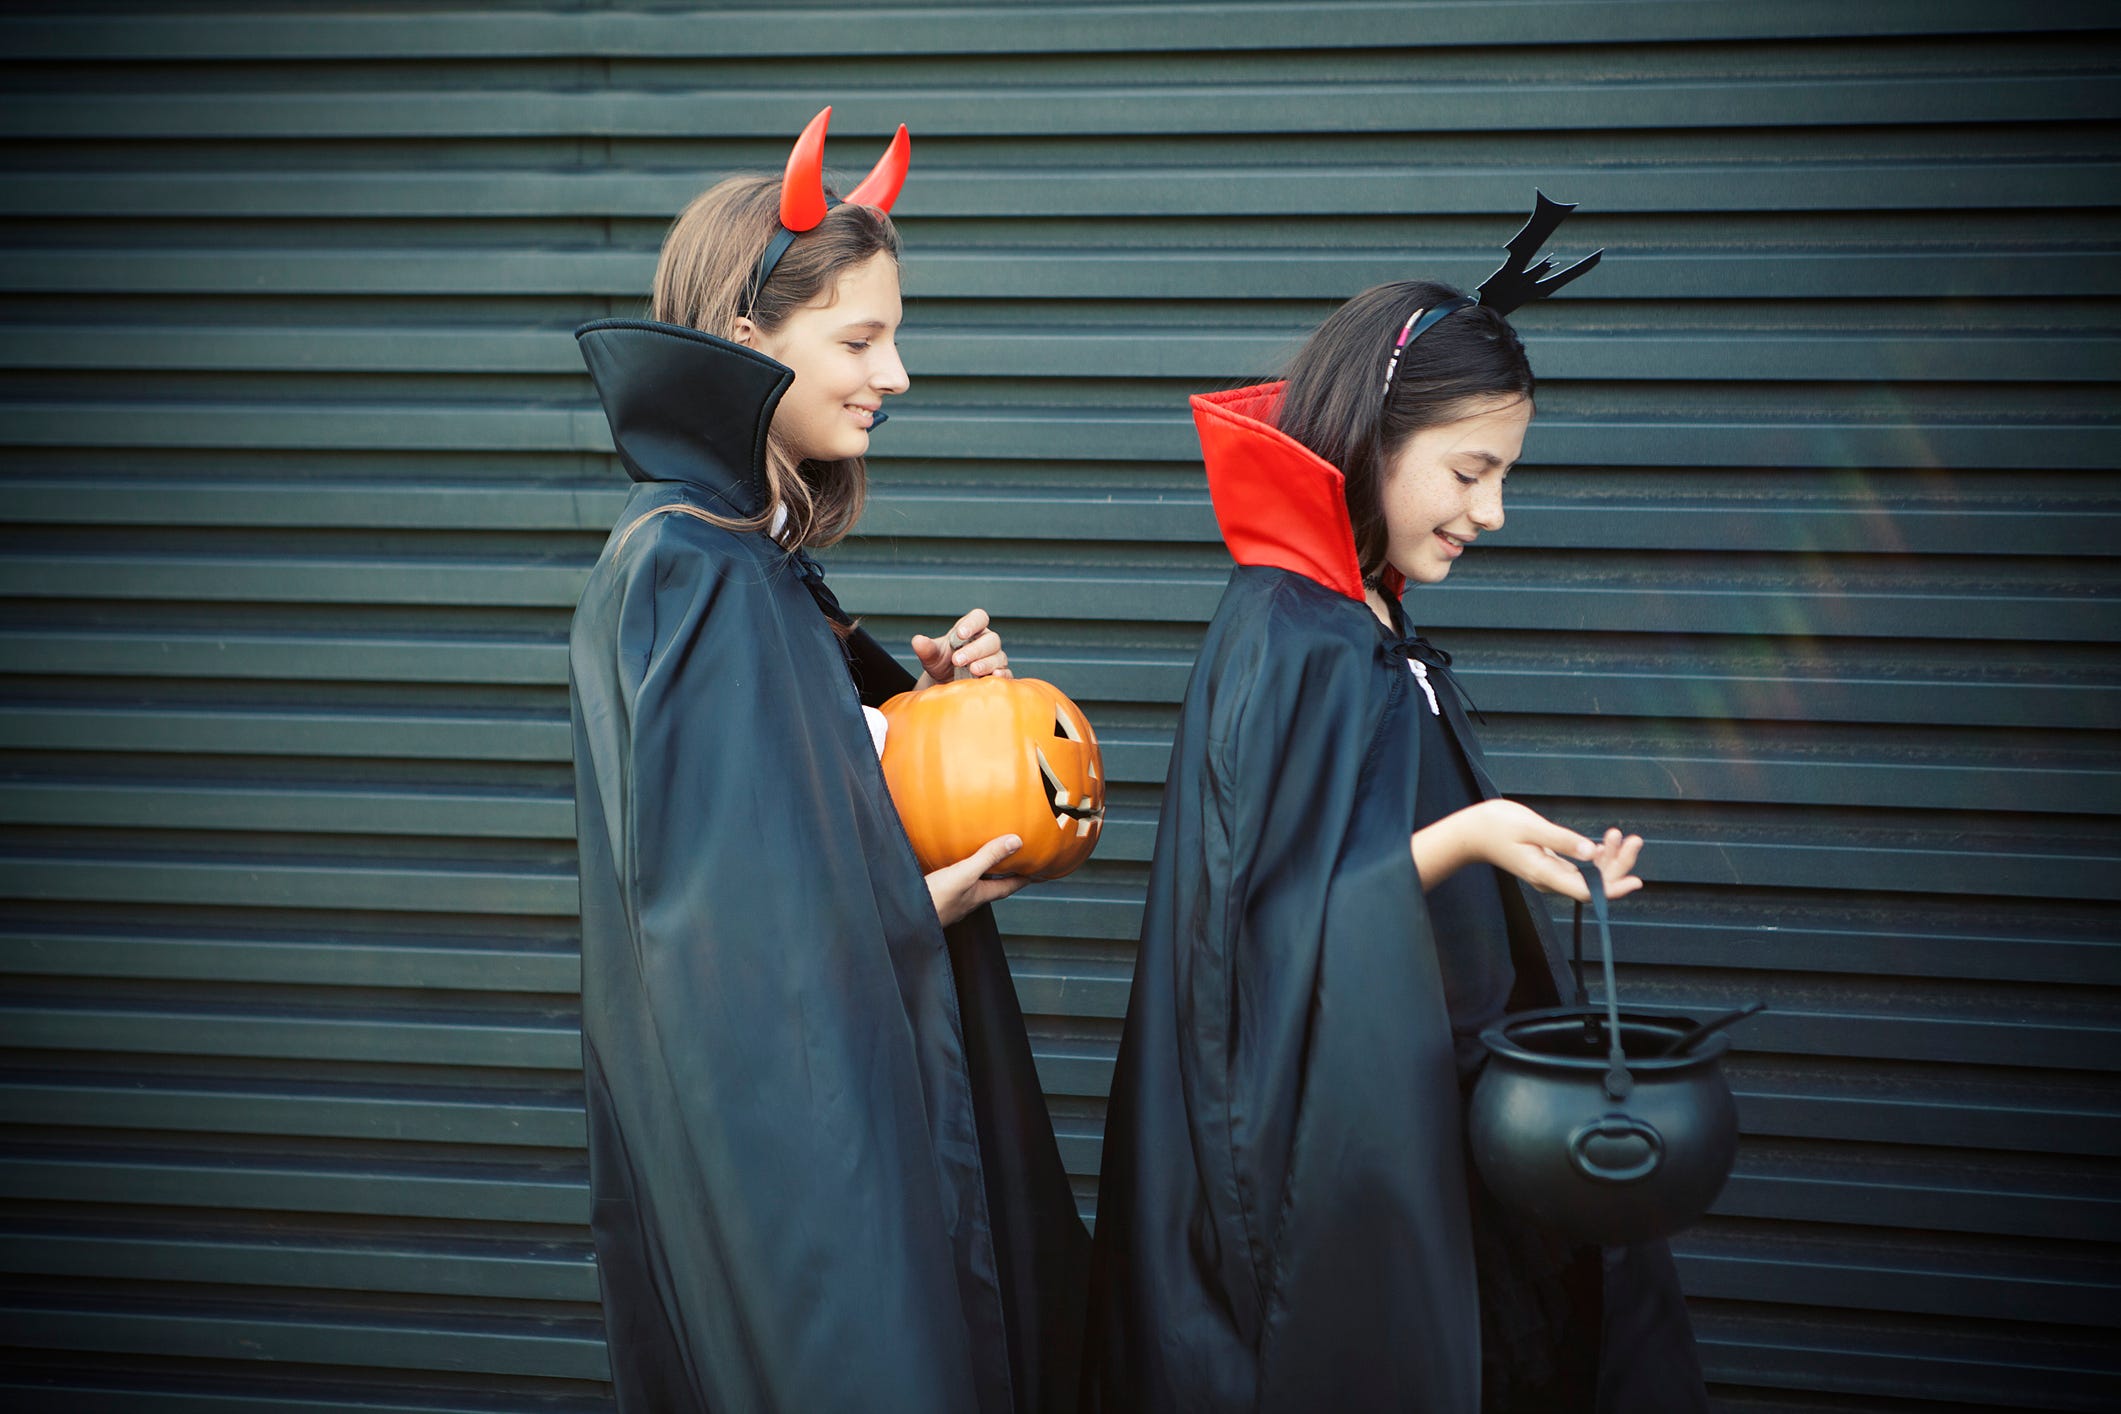 The city of Chesapeake, Virginia has an ordinance that bans anyone 13 years and older from trick or treating.